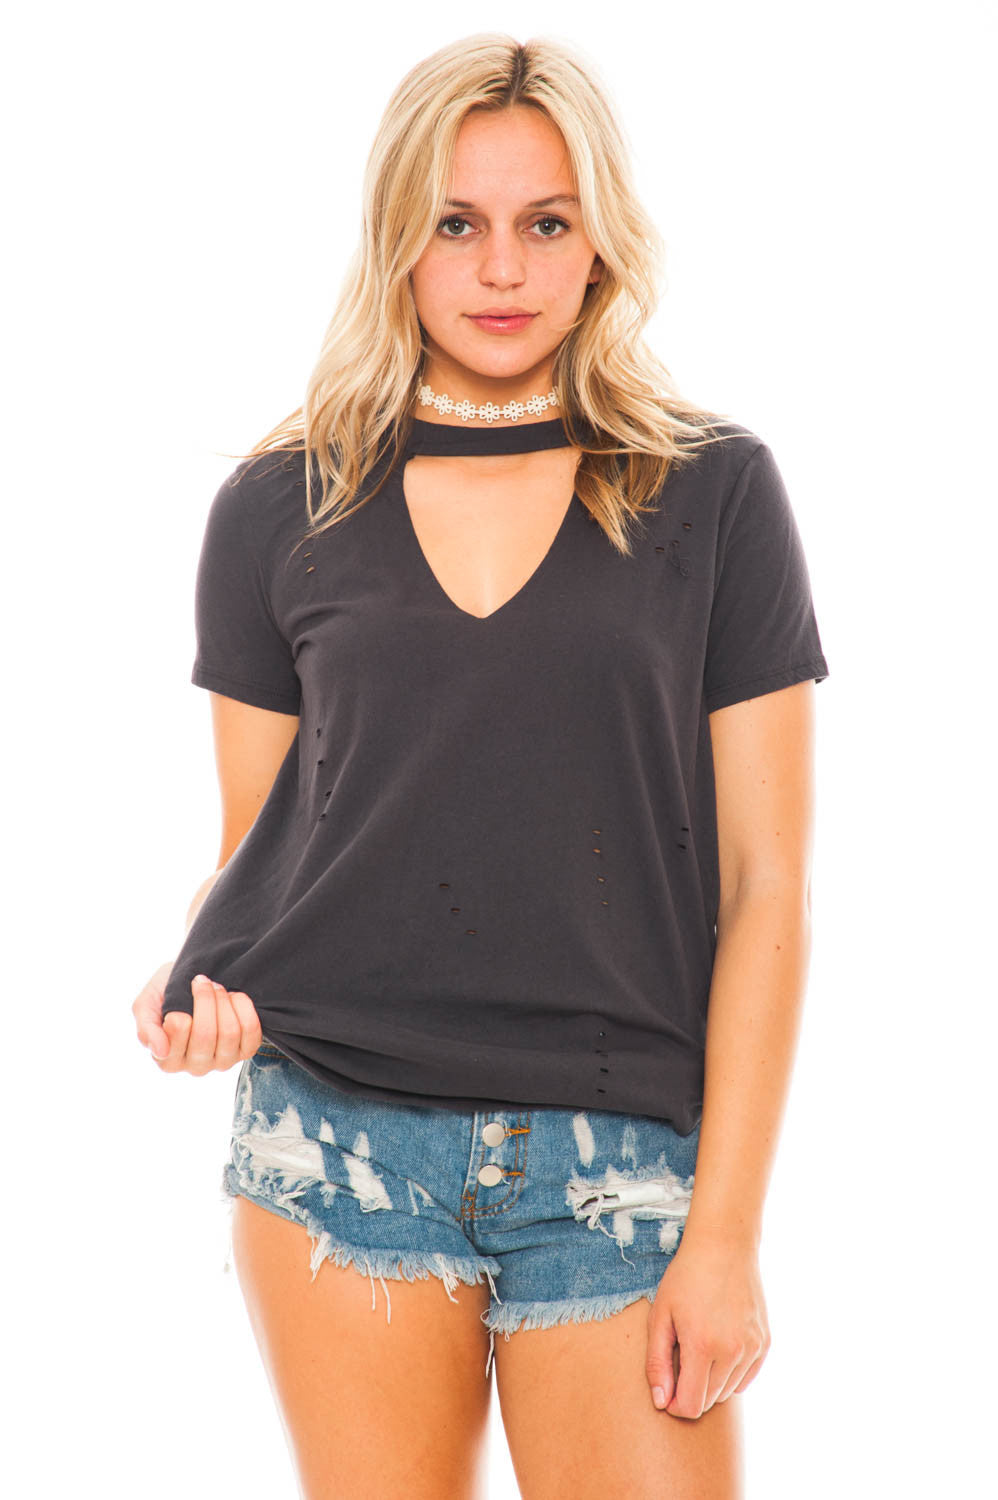 Top - Distressed V-neck Tee by Lush